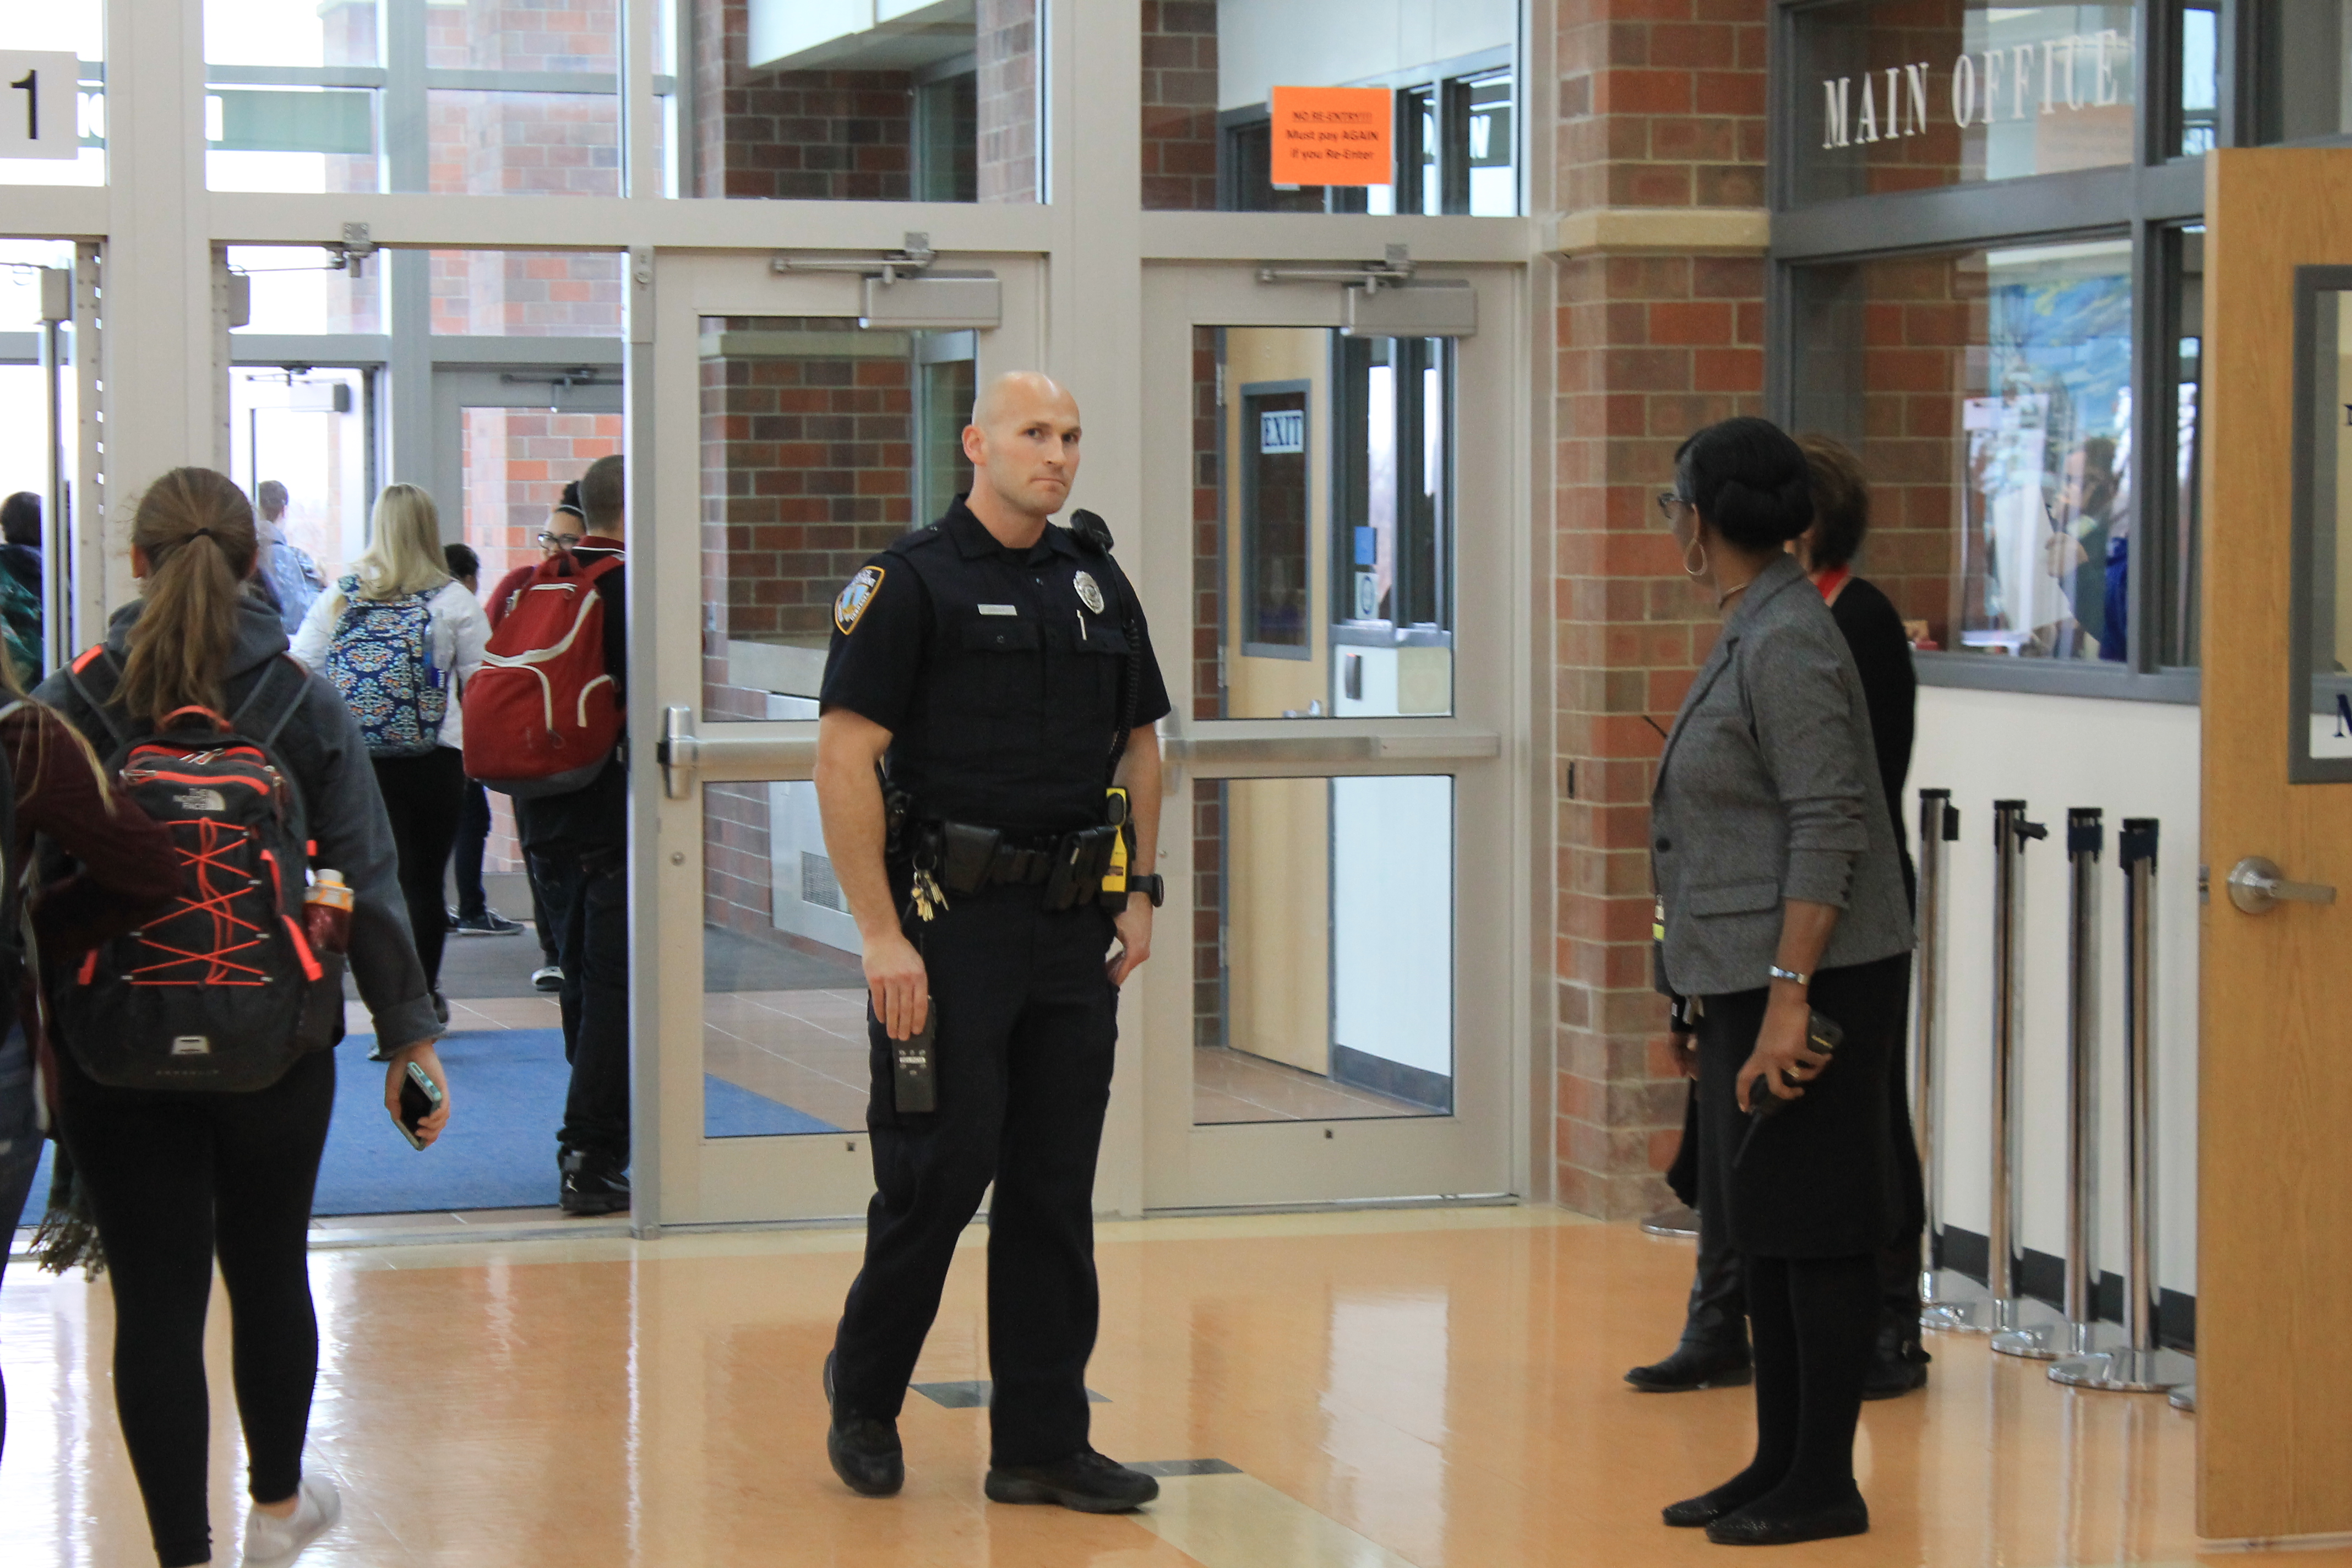 School Resource Officer, Shane Jensen looks to the camera shortly after announcing that the lockout can be lifted.